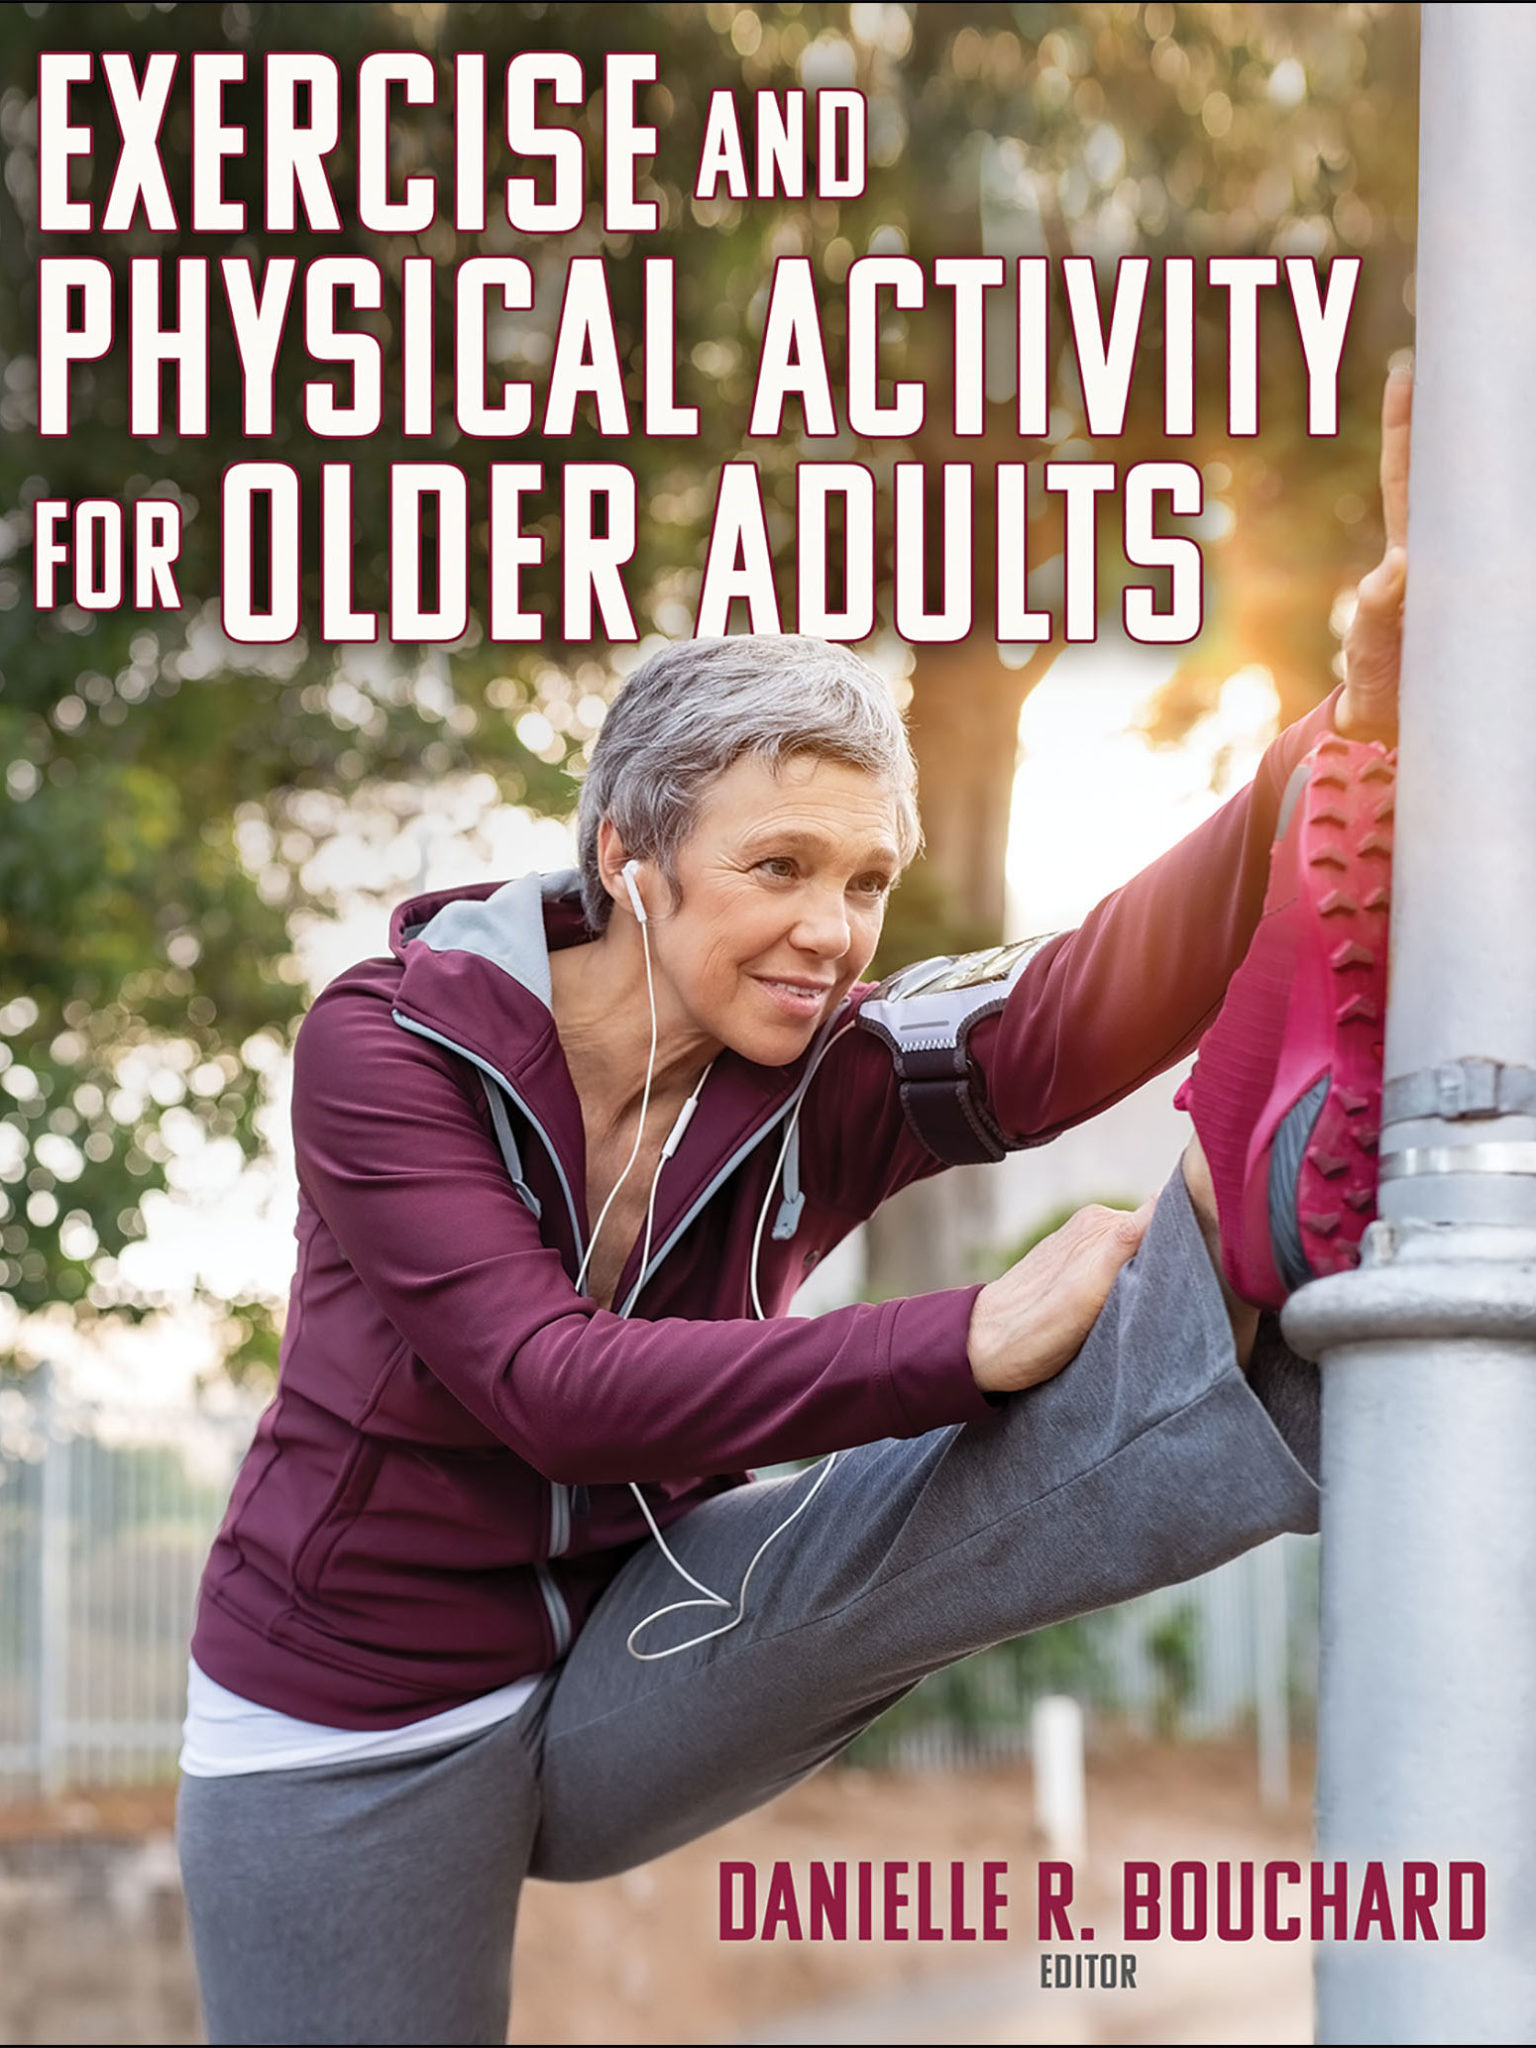 Exercise and Physical Activity for Older Adults - NETA, National